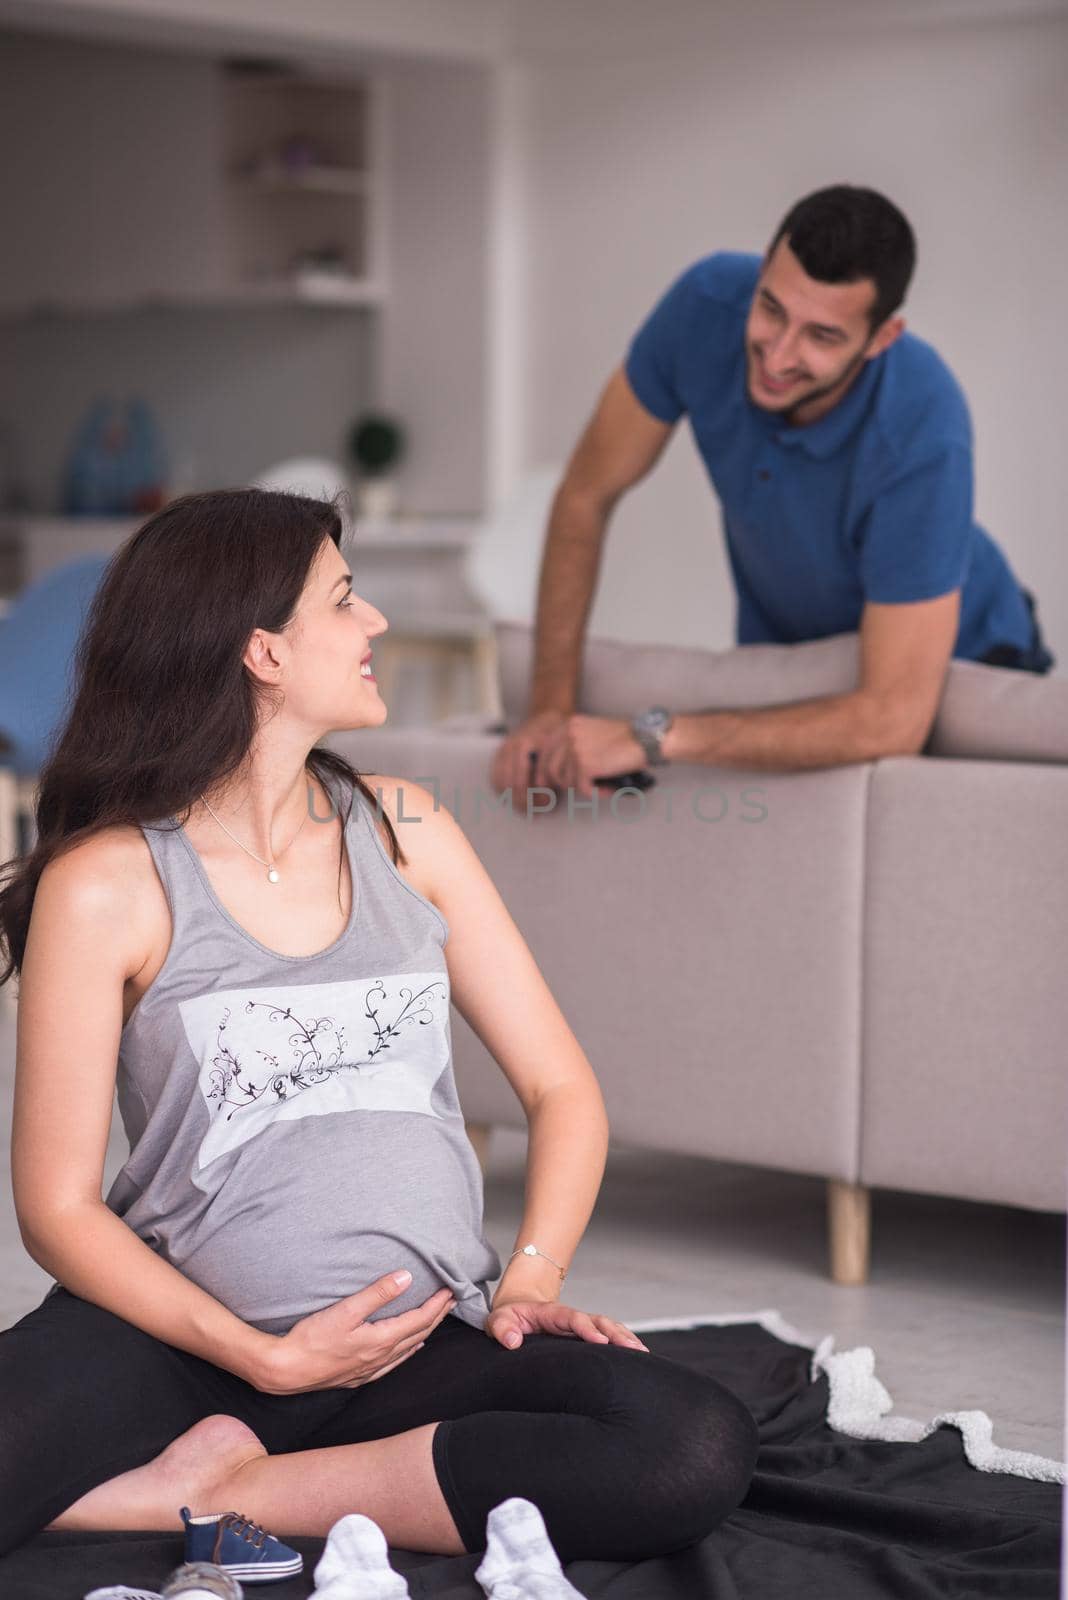 pregnant couple checking a list of things for their unborn baby by dotshock